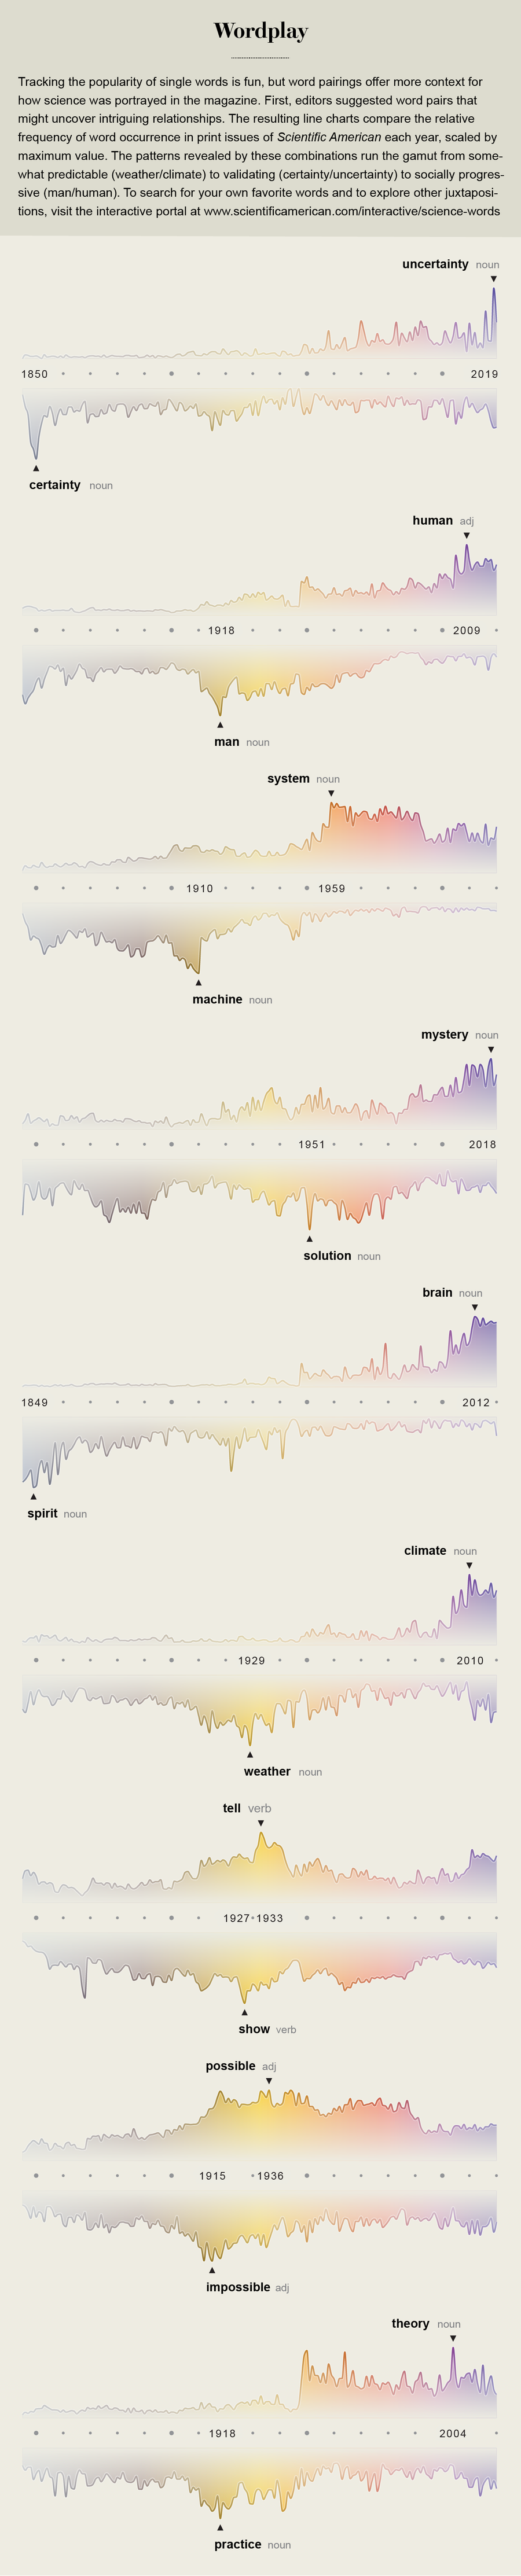 The relative frequency of revealing and interesting terms in Scientific American, from 1845 to the present.